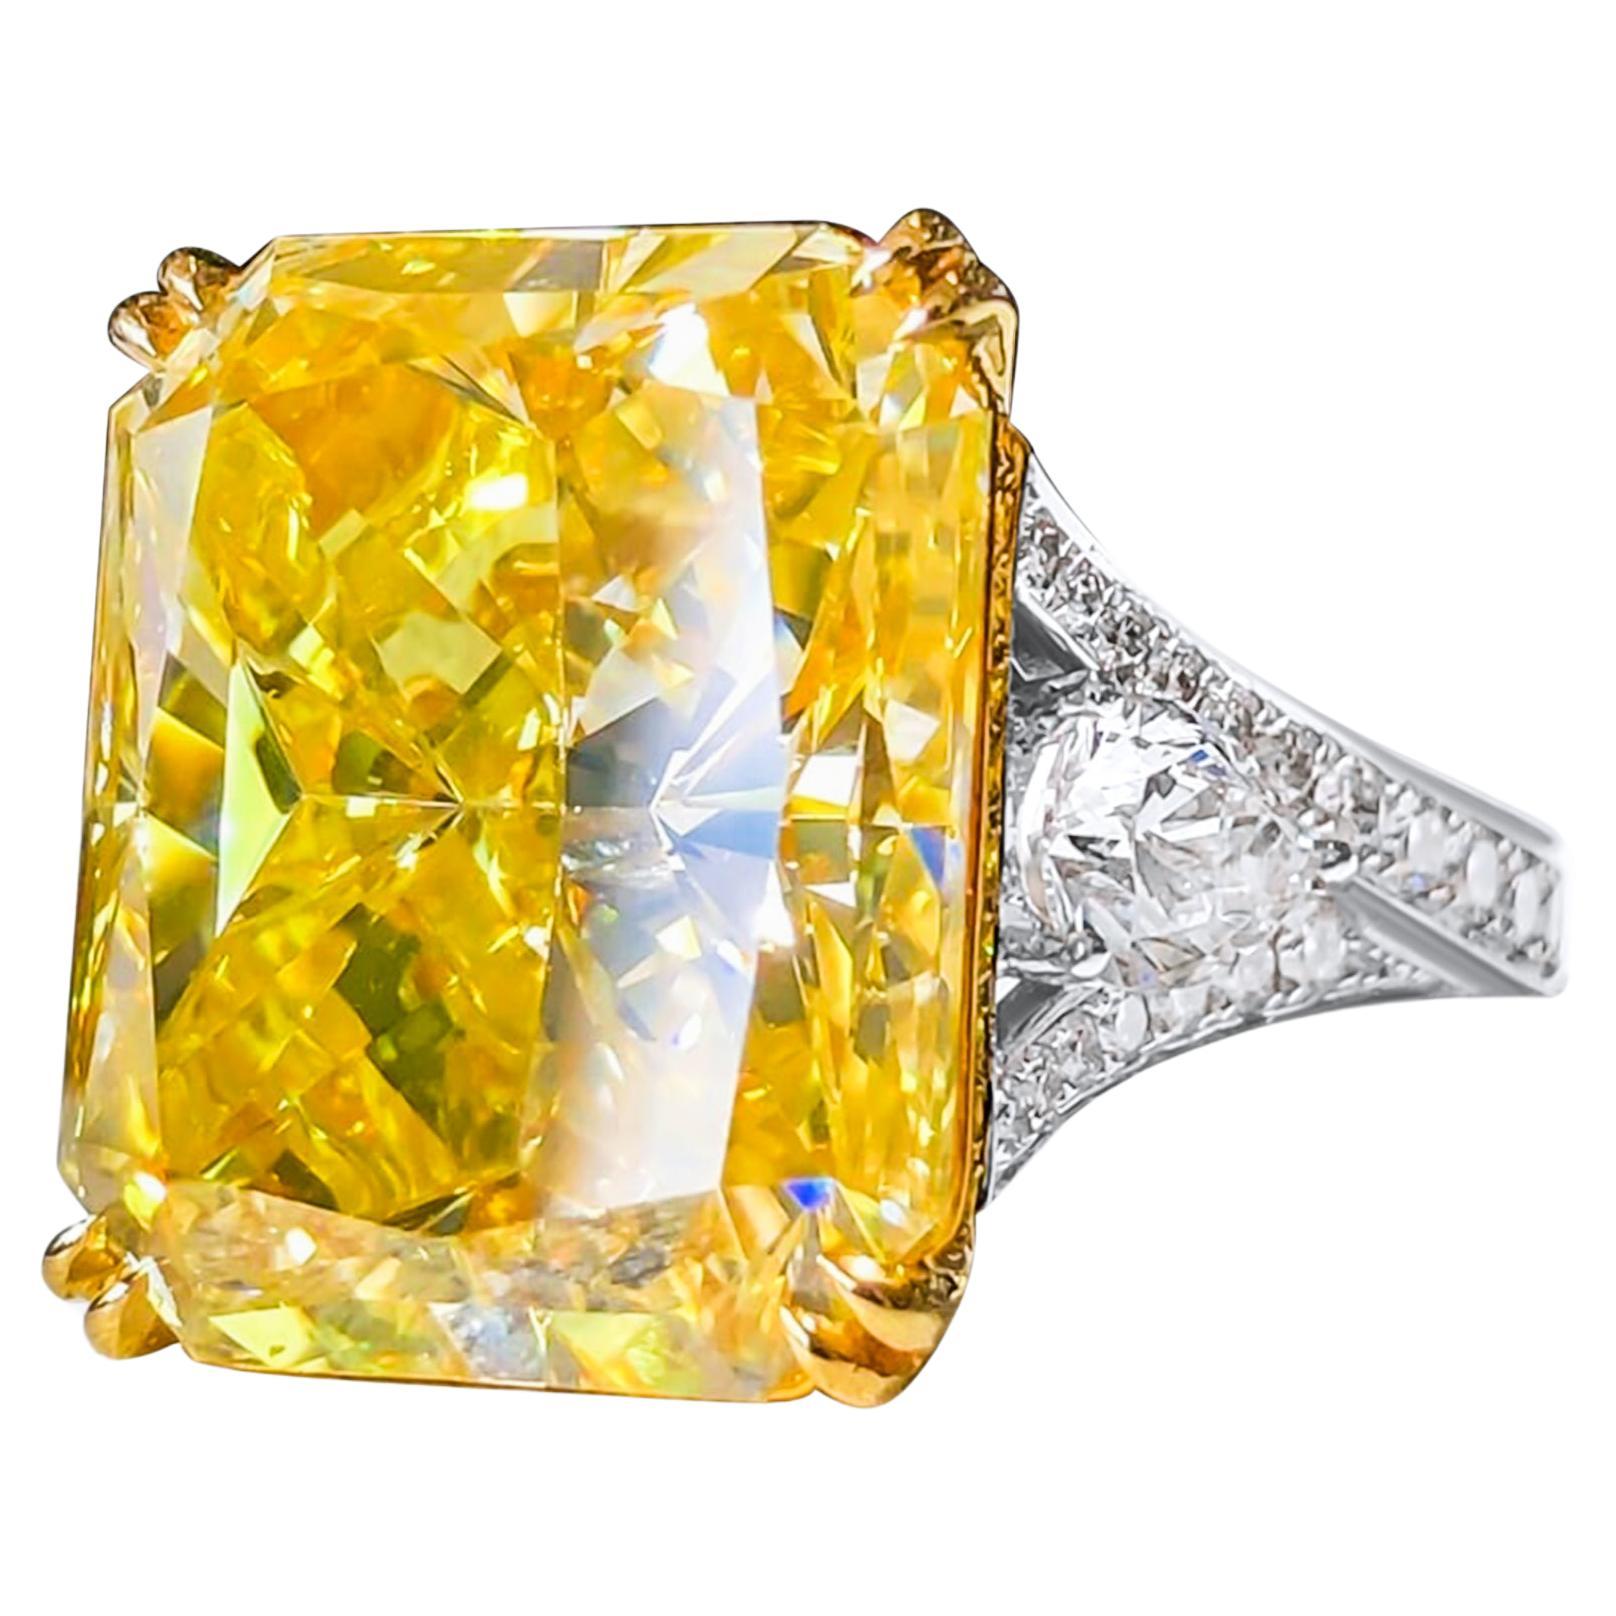 Majestic GIA Certified 20.06 Carat Cushion Cut Yellow Diamond Cocktail Ring For Sale